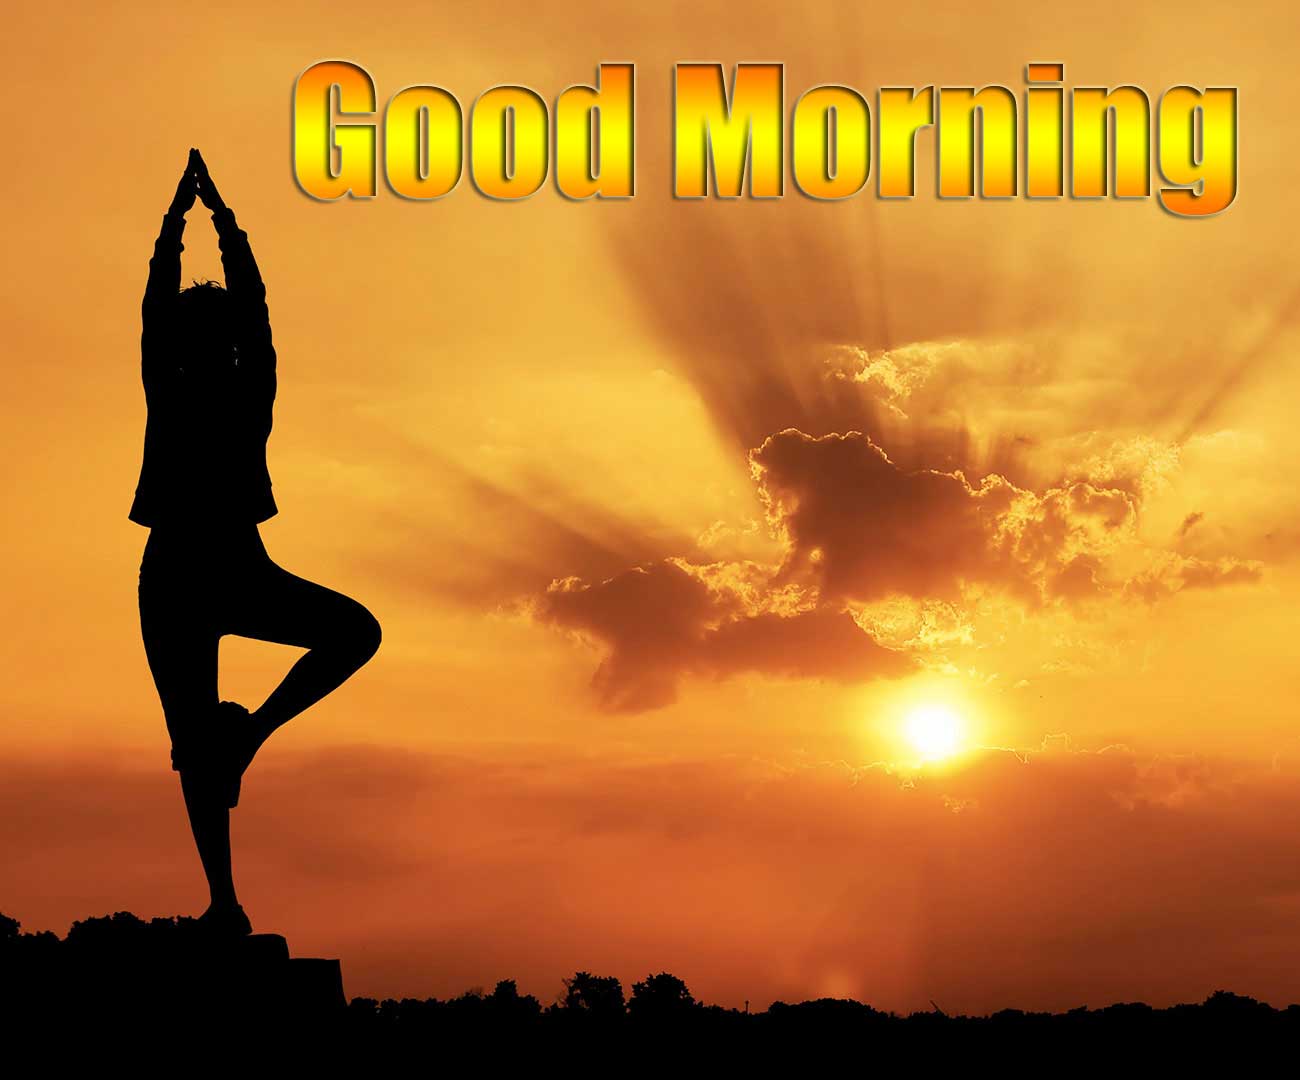 Good Morning Wishes With Sunrise Pics Free Download 